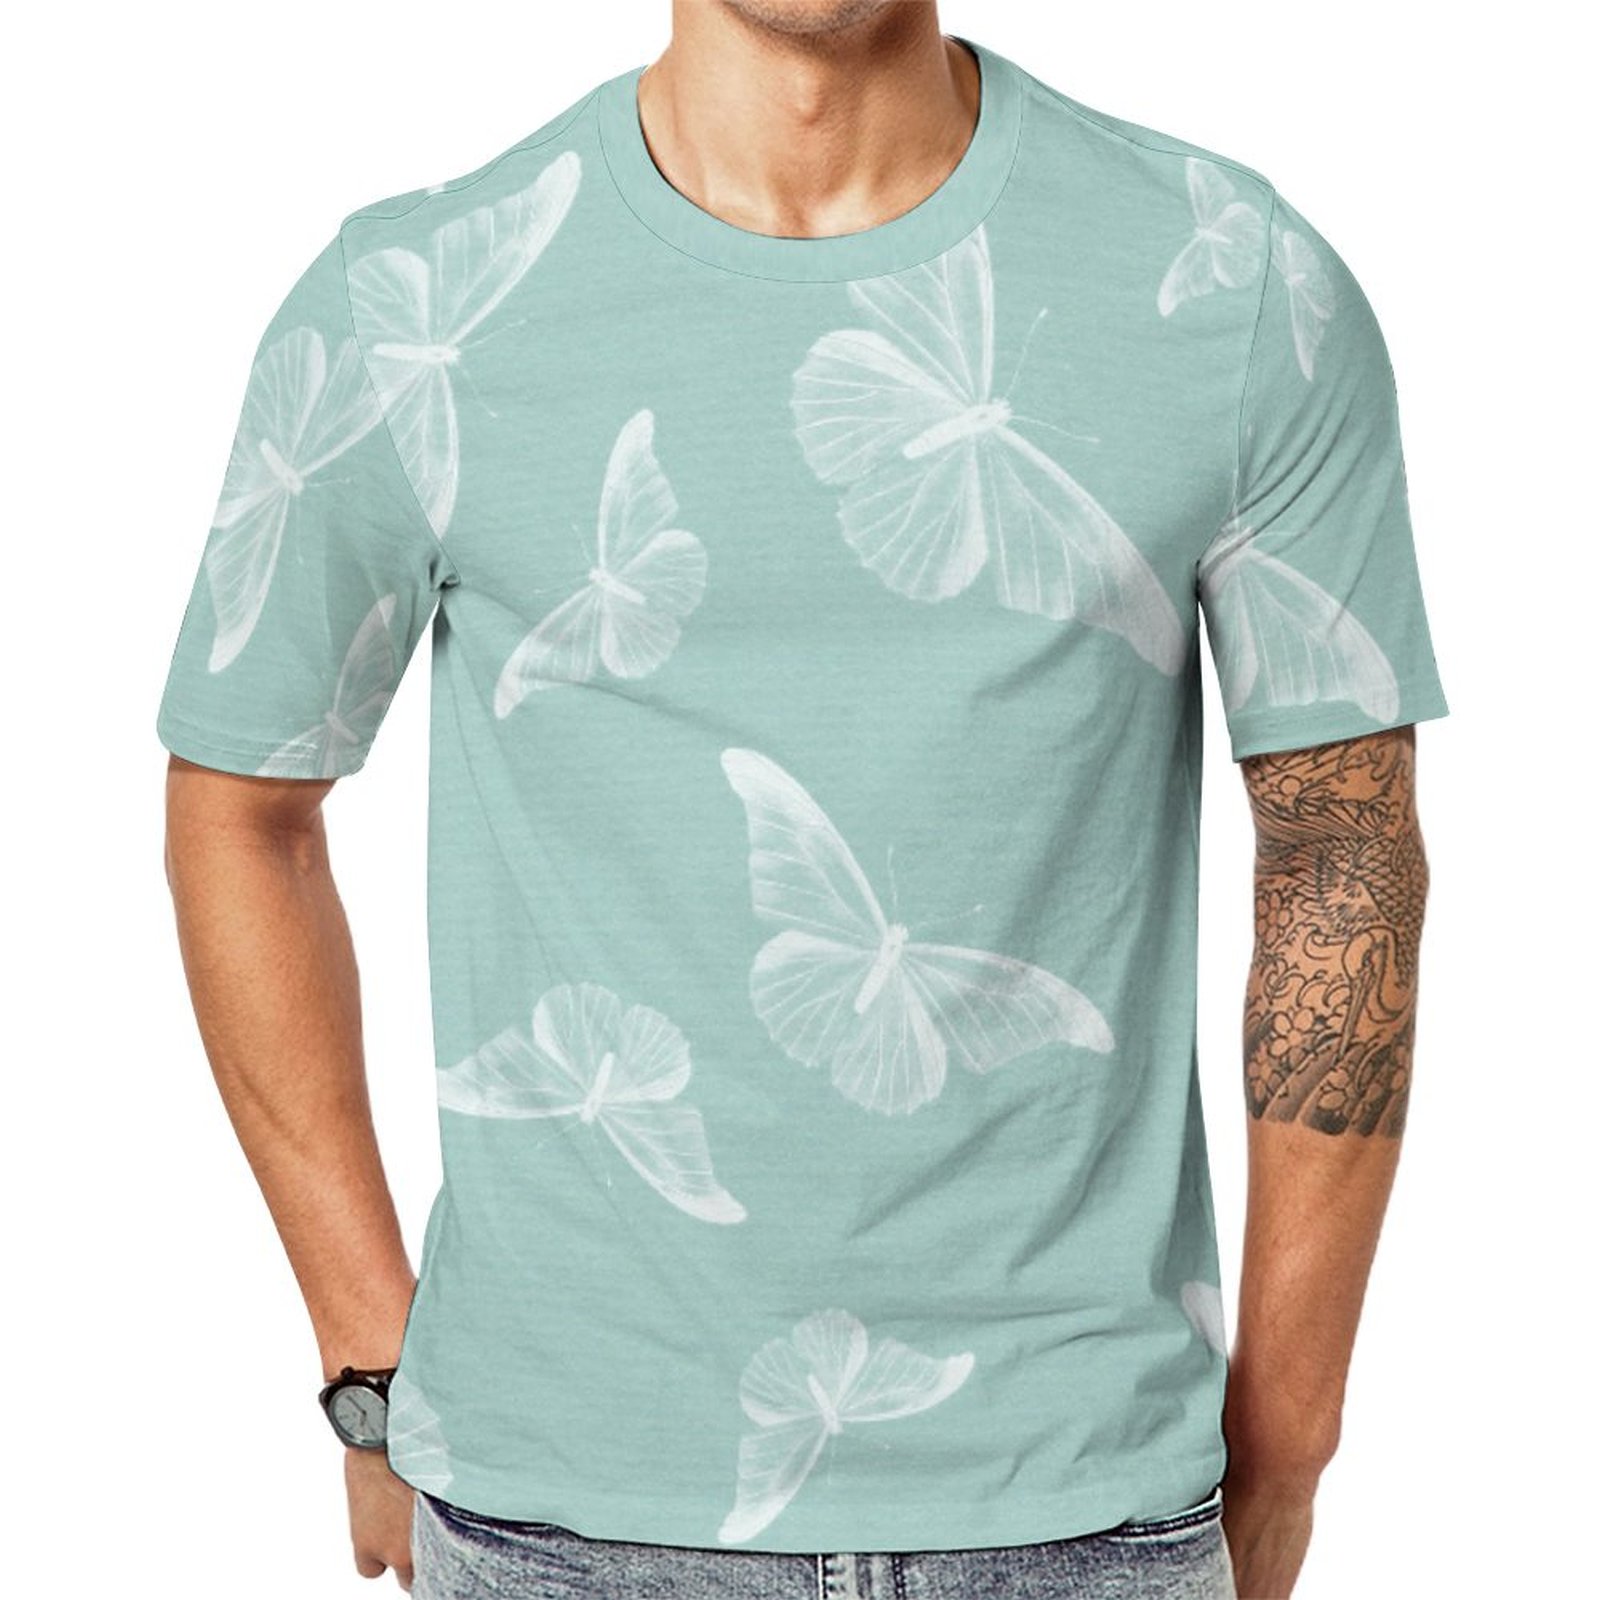 Girly Trendy Cute White Butterflies Short Sleeve Print Unisex Tshirt Summer Casual Tees for Men and Women Coolcoshirts